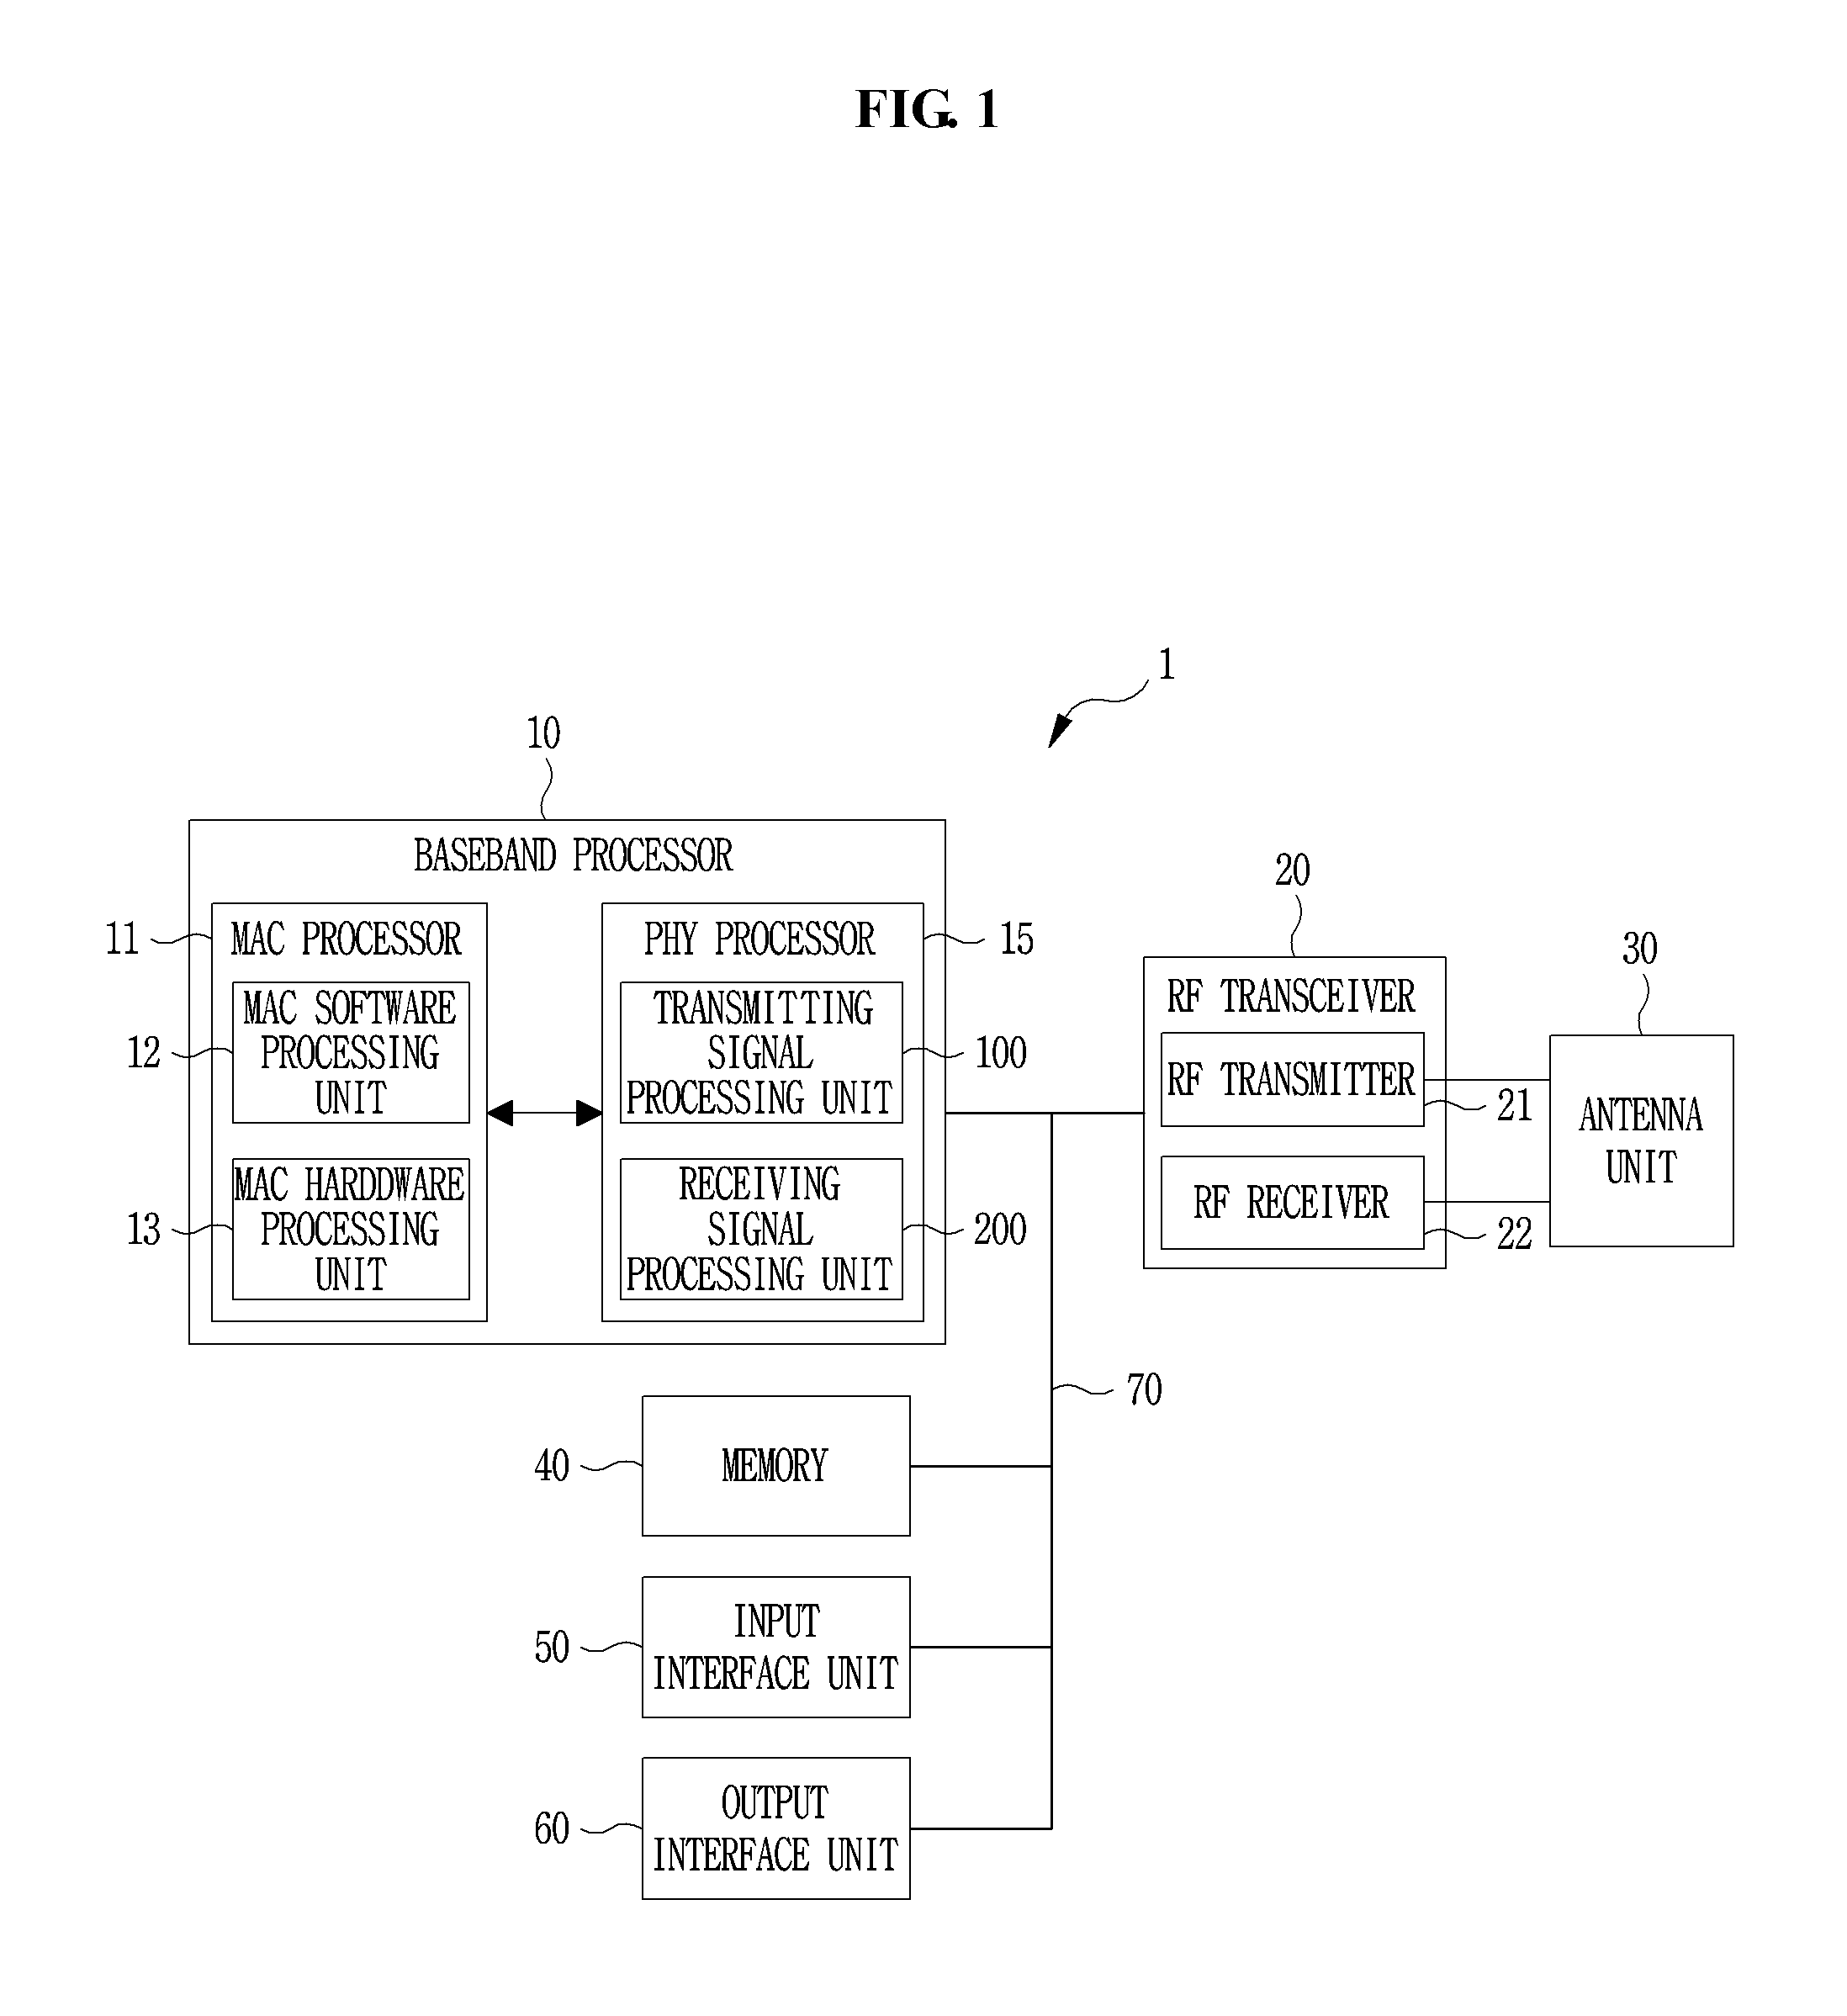 Method and apparatus for dynamic channel sensing for direct link in a high efficiency wireless LAN